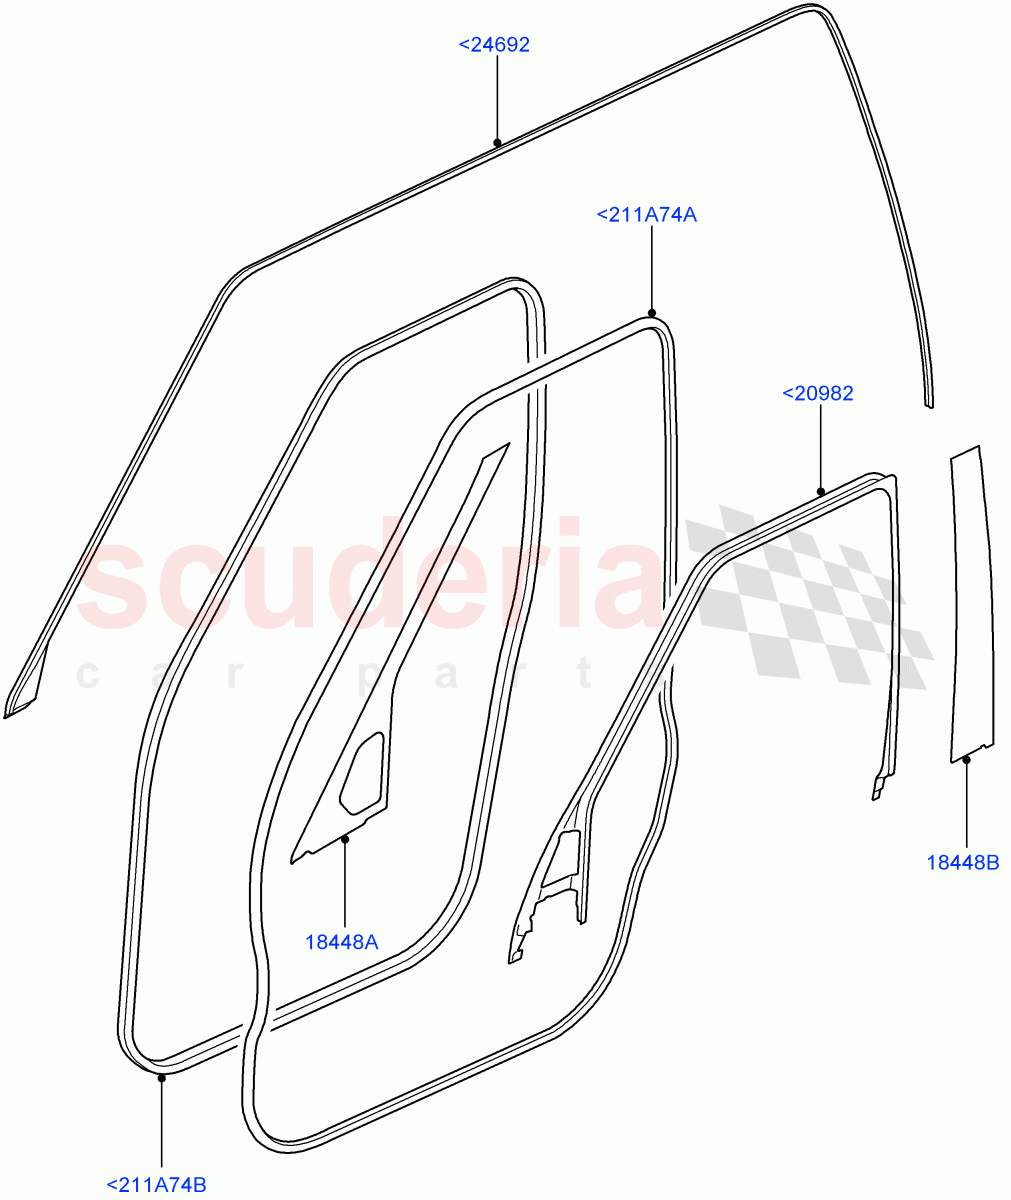 Front Doors, Hinges & Weatherstrips(Finisher And Seals)((V)FROMAA000001) of Land Rover Land Rover Discovery 4 (2010-2016) [5.0 OHC SGDI NA V8 Petrol]